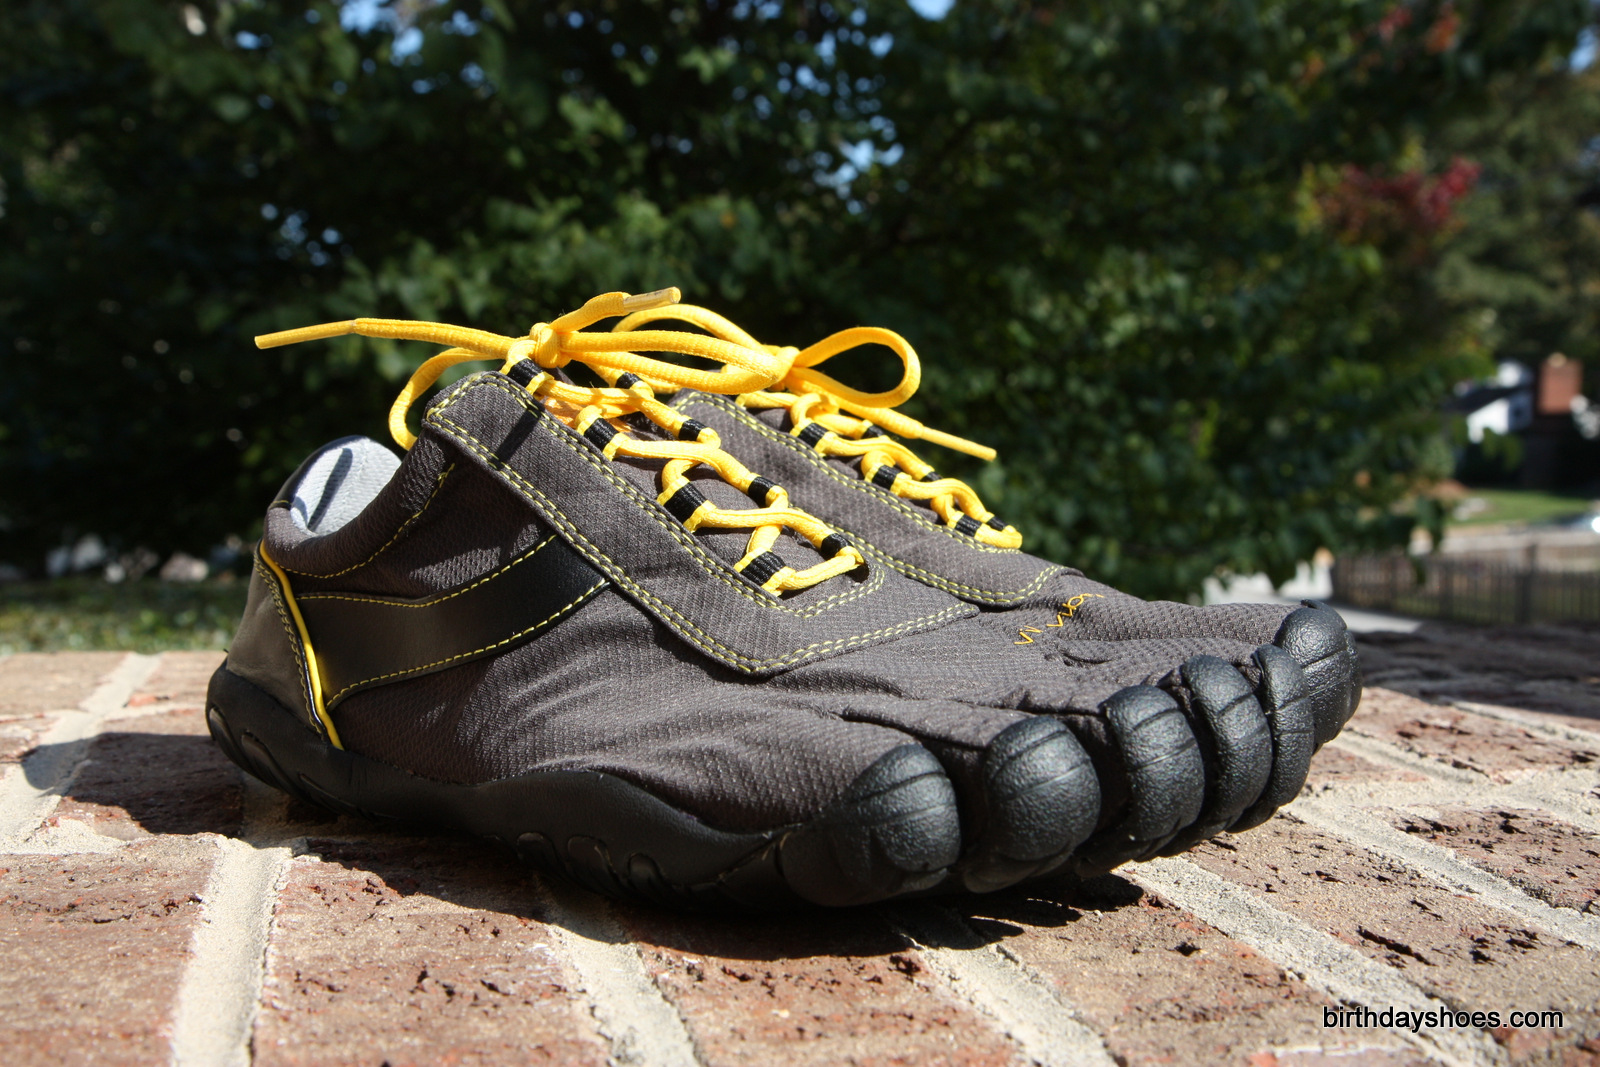 The Speed XC FiveFingers donning the included canary yellow laces instead of the dark grey.